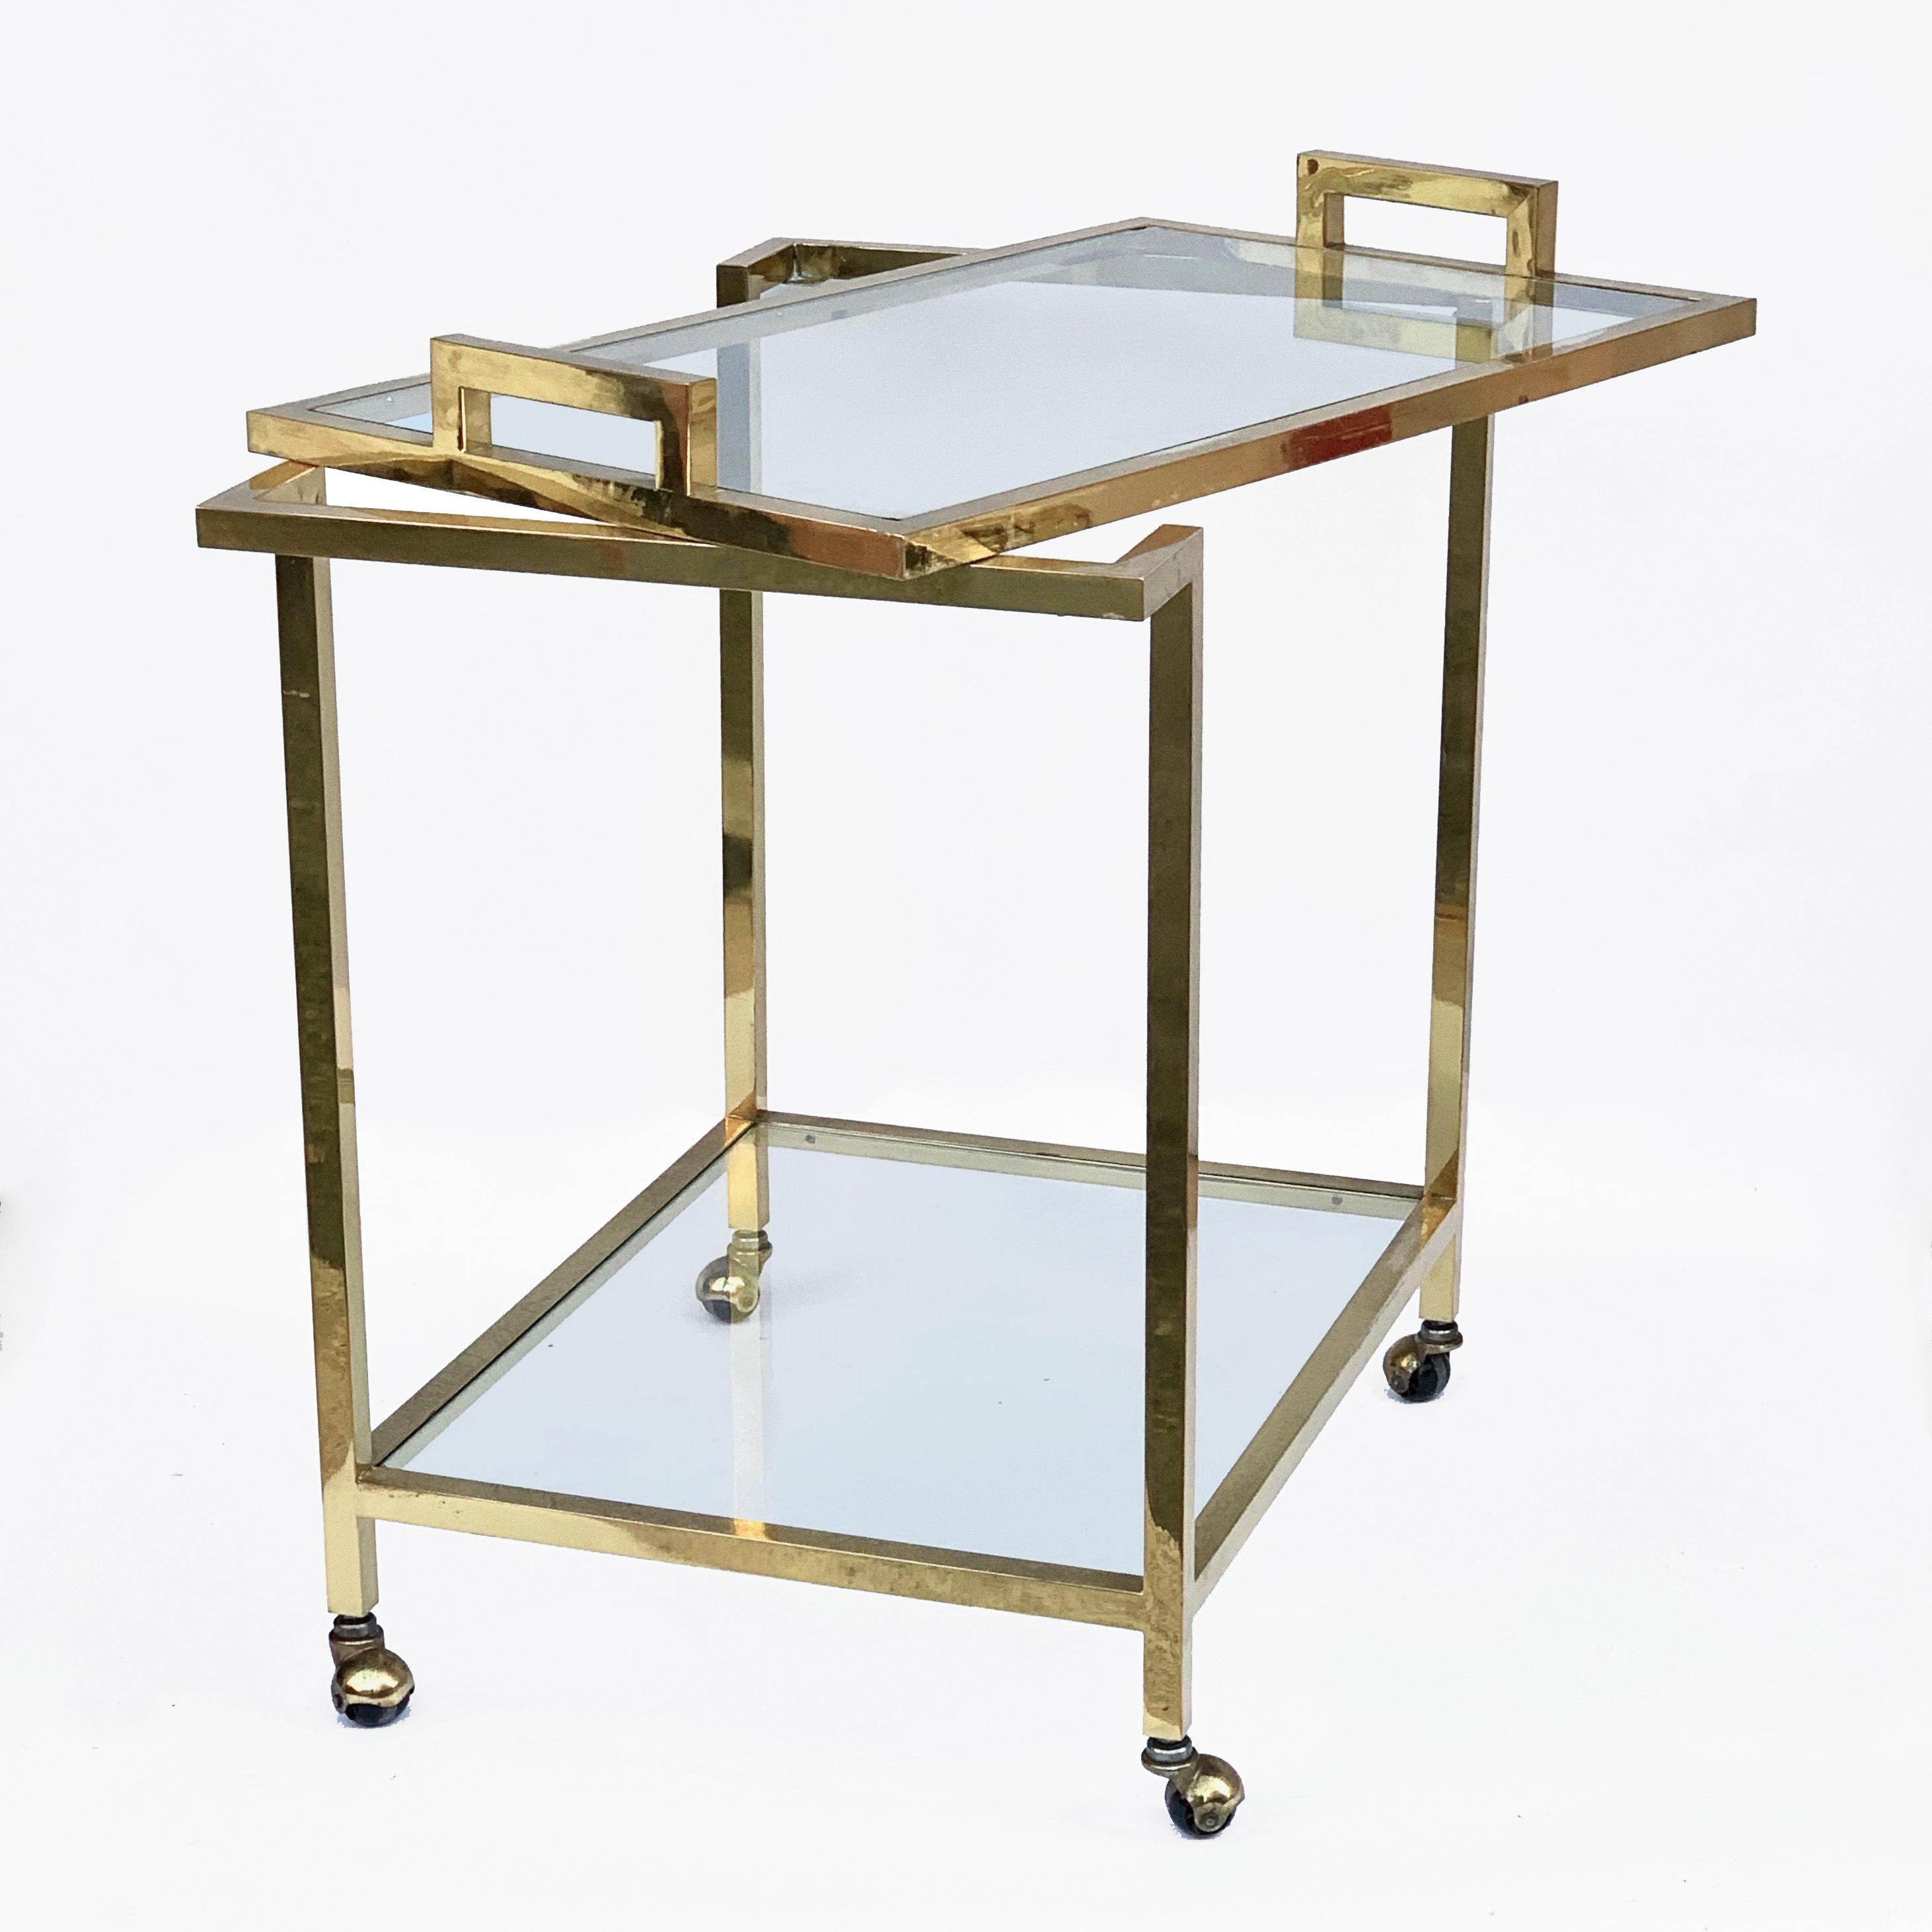 Romeo Rega style Trolley with Service Tray, Gilded Brass and Glass, Italy, 1980s For Sale 9